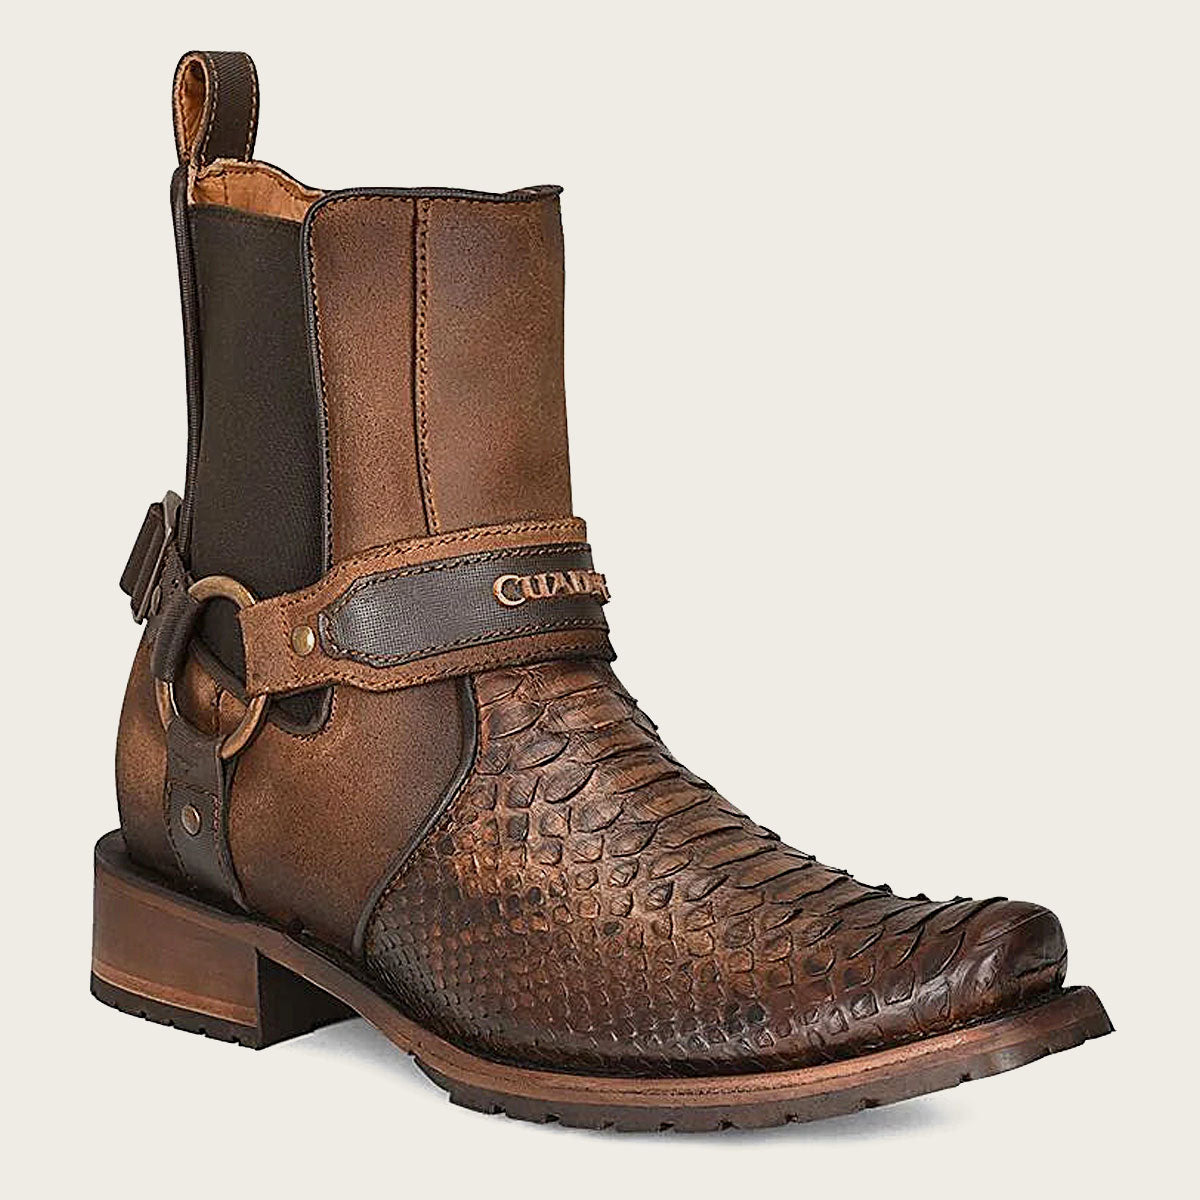 Hand-painted brown python leather ankle boots